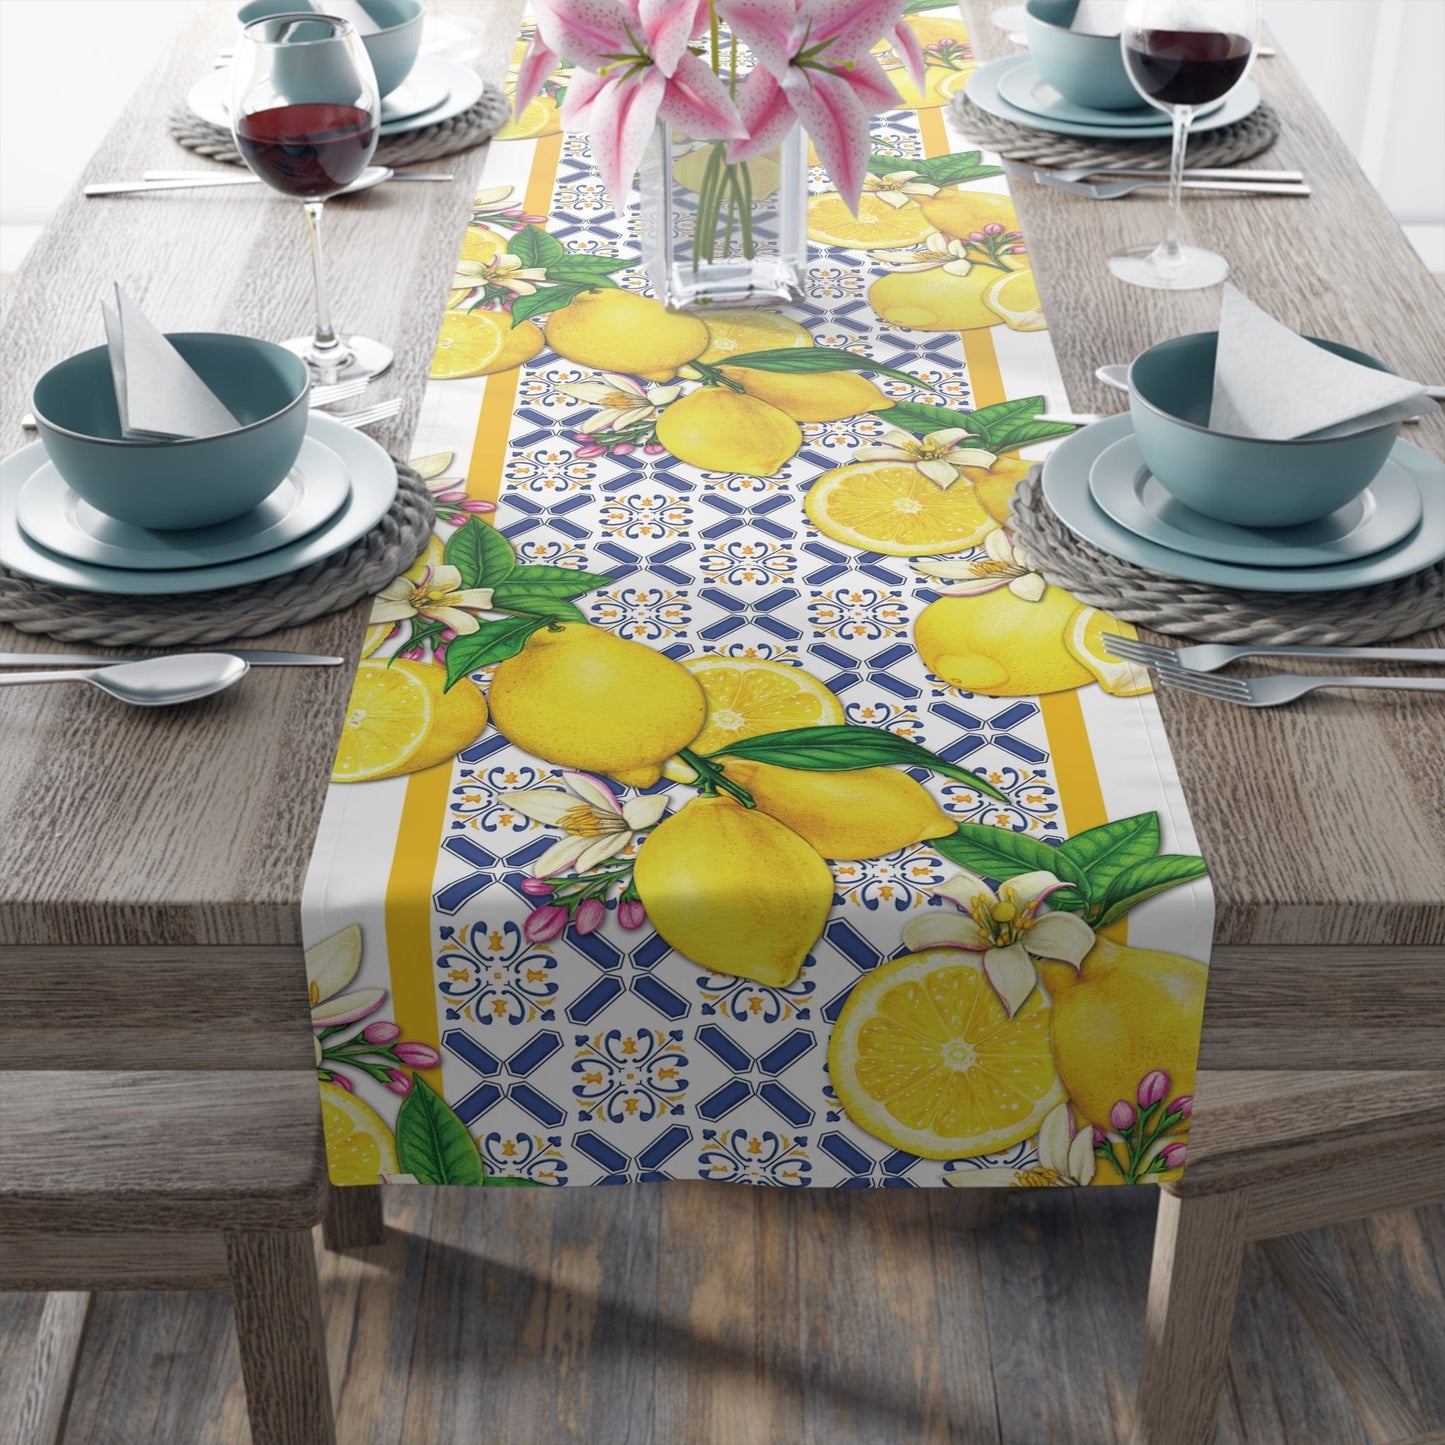 Kate McEnroe New York Cobalt Blue and Yellow Lemon and Tiles Table Runner, Mediterranean Floral Dining Table Centerpiece, Fall Home Decor, Holiday Table Setting Table Runners 16" × 90" / Polyester 30121286565349553077